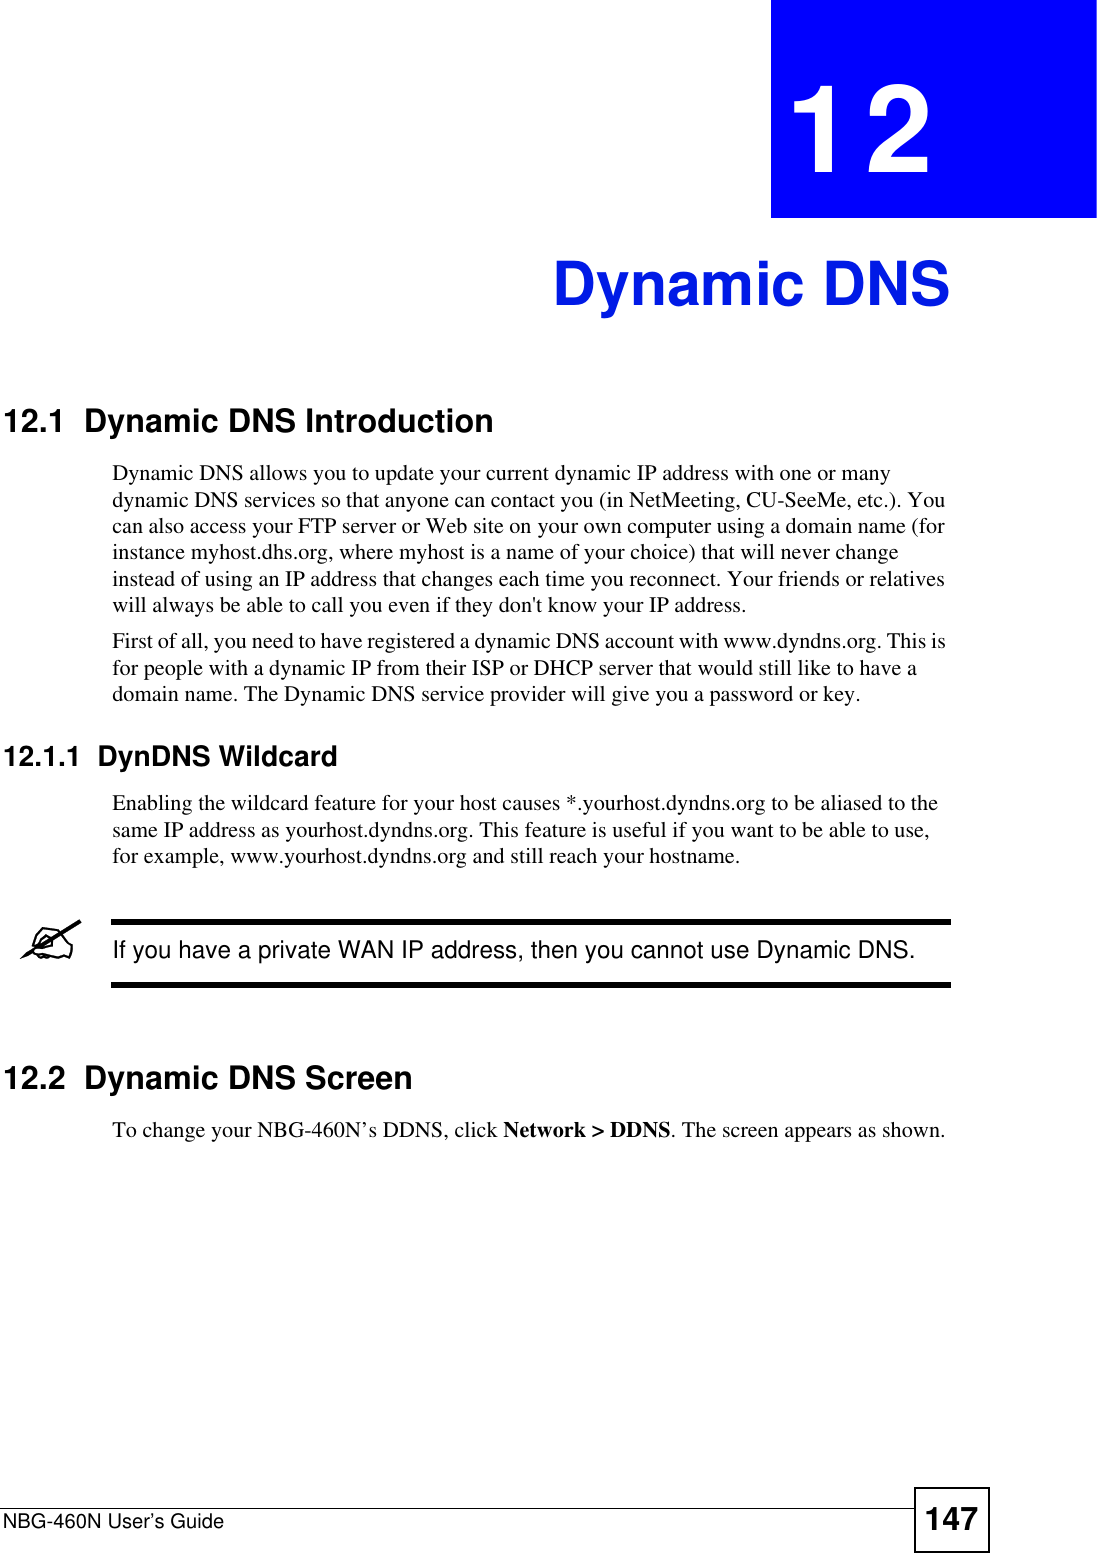 NBG-460N User’s Guide 147CHAPTER 12Dynamic DNS12.1  Dynamic DNS Introduction Dynamic DNS allows you to update your current dynamic IP address with one or many dynamic DNS services so that anyone can contact you (in NetMeeting, CU-SeeMe, etc.). You can also access your FTP server or Web site on your own computer using a domain name (for instance myhost.dhs.org, where myhost is a name of your choice) that will never change instead of using an IP address that changes each time you reconnect. Your friends or relatives will always be able to call you even if they don&apos;t know your IP address.First of all, you need to have registered a dynamic DNS account with www.dyndns.org. This is for people with a dynamic IP from their ISP or DHCP server that would still like to have a domain name. The Dynamic DNS service provider will give you a password or key.12.1.1  DynDNS Wildcard Enabling the wildcard feature for your host causes *.yourhost.dyndns.org to be aliased to the same IP address as yourhost.dyndns.org. This feature is useful if you want to be able to use, for example, www.yourhost.dyndns.org and still reach your hostname.&quot;If you have a private WAN IP address, then you cannot use Dynamic DNS.12.2  Dynamic DNS ScreenTo change your NBG-460N’s DDNS, click Network &gt; DDNS. The screen appears as shown.